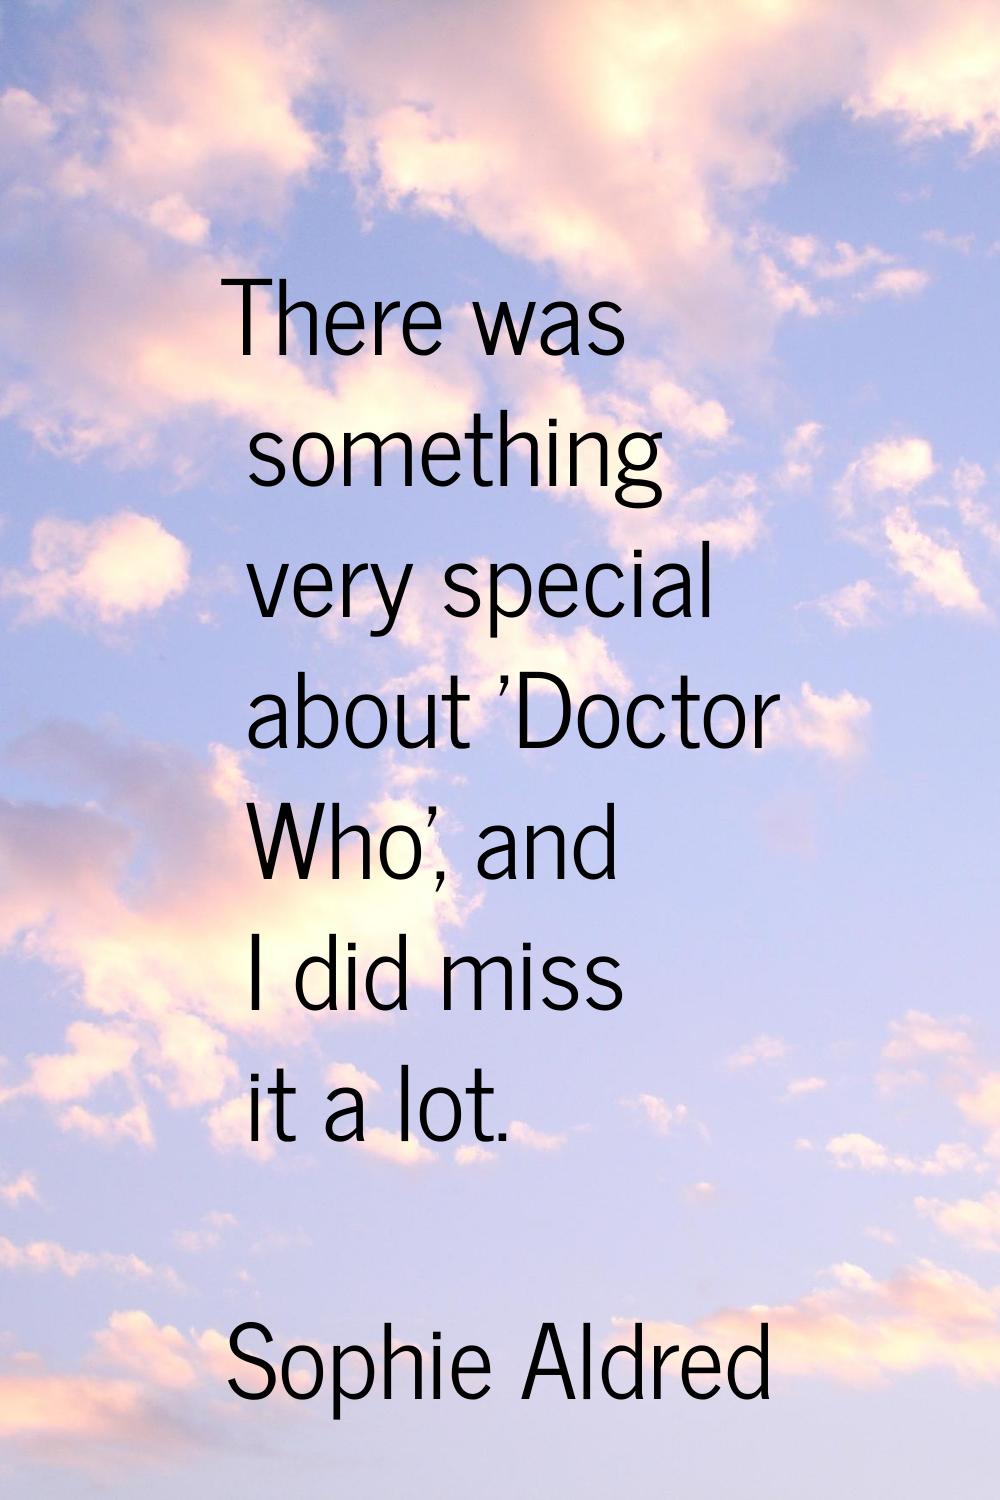 There was something very special about 'Doctor Who', and I did miss it a lot.